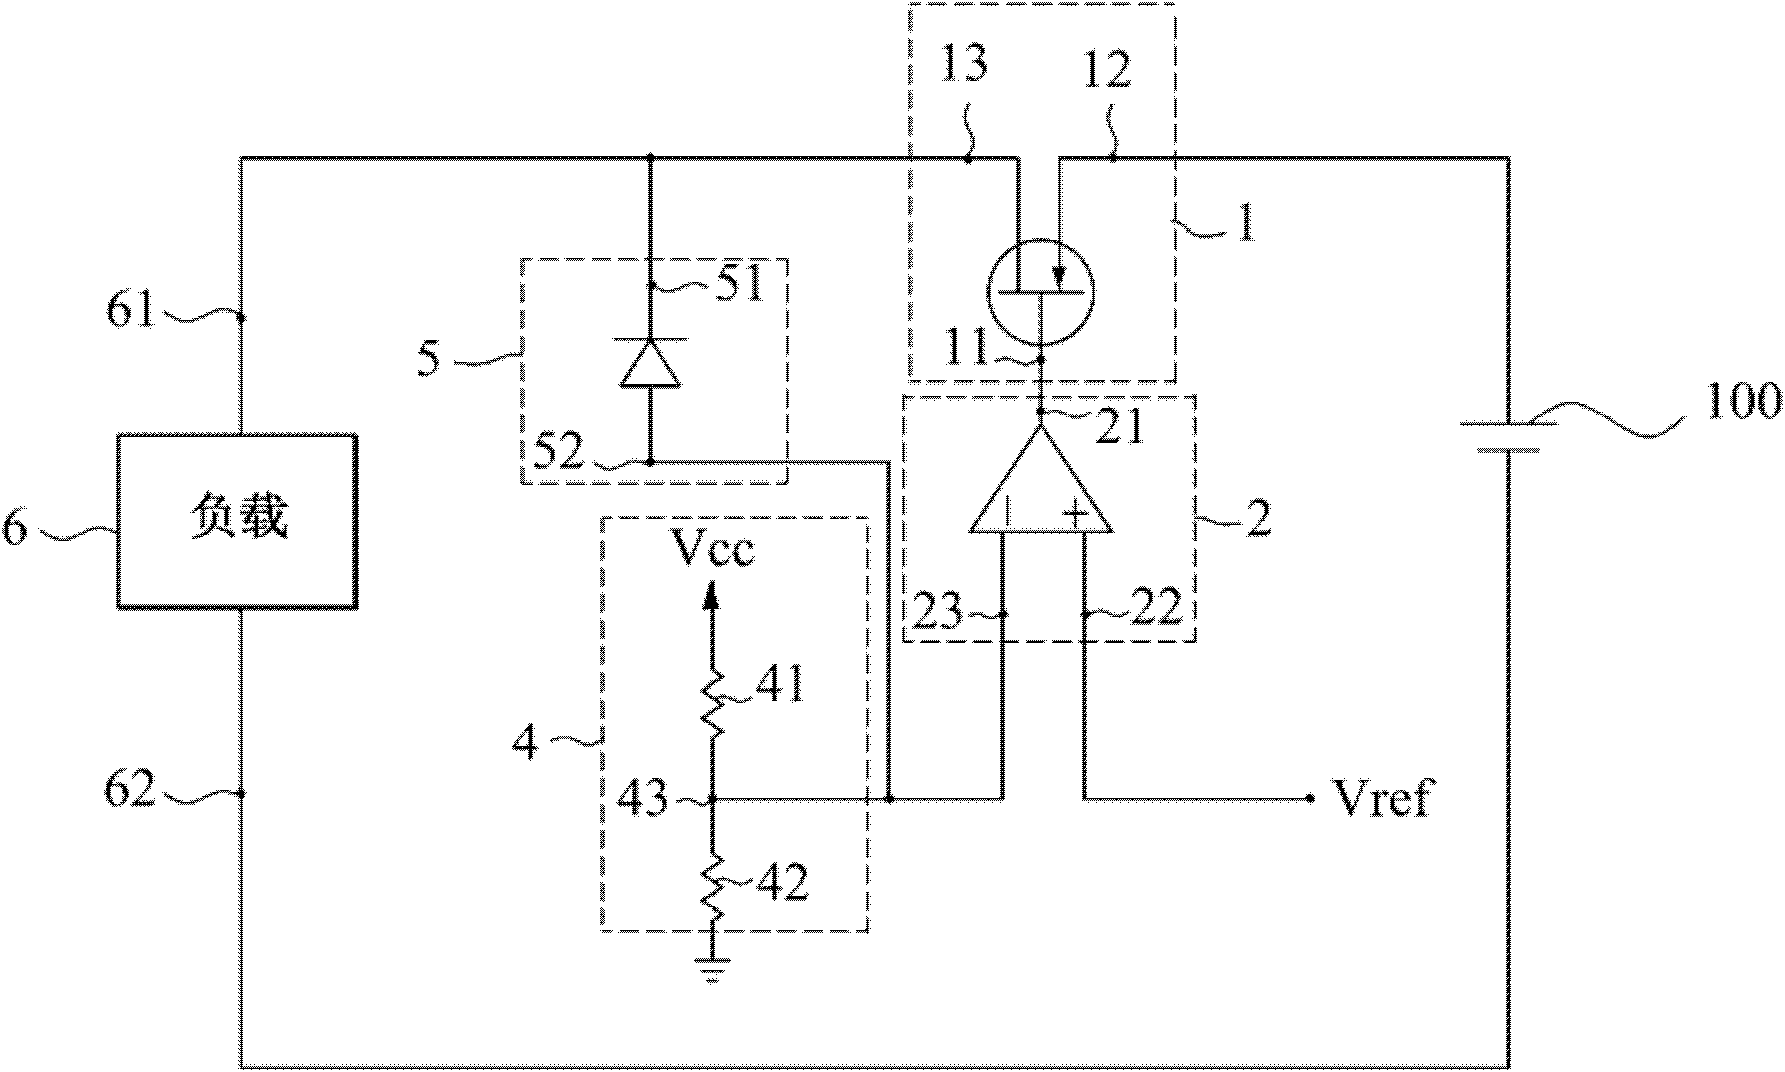 Battery output short-circuit protection circuit